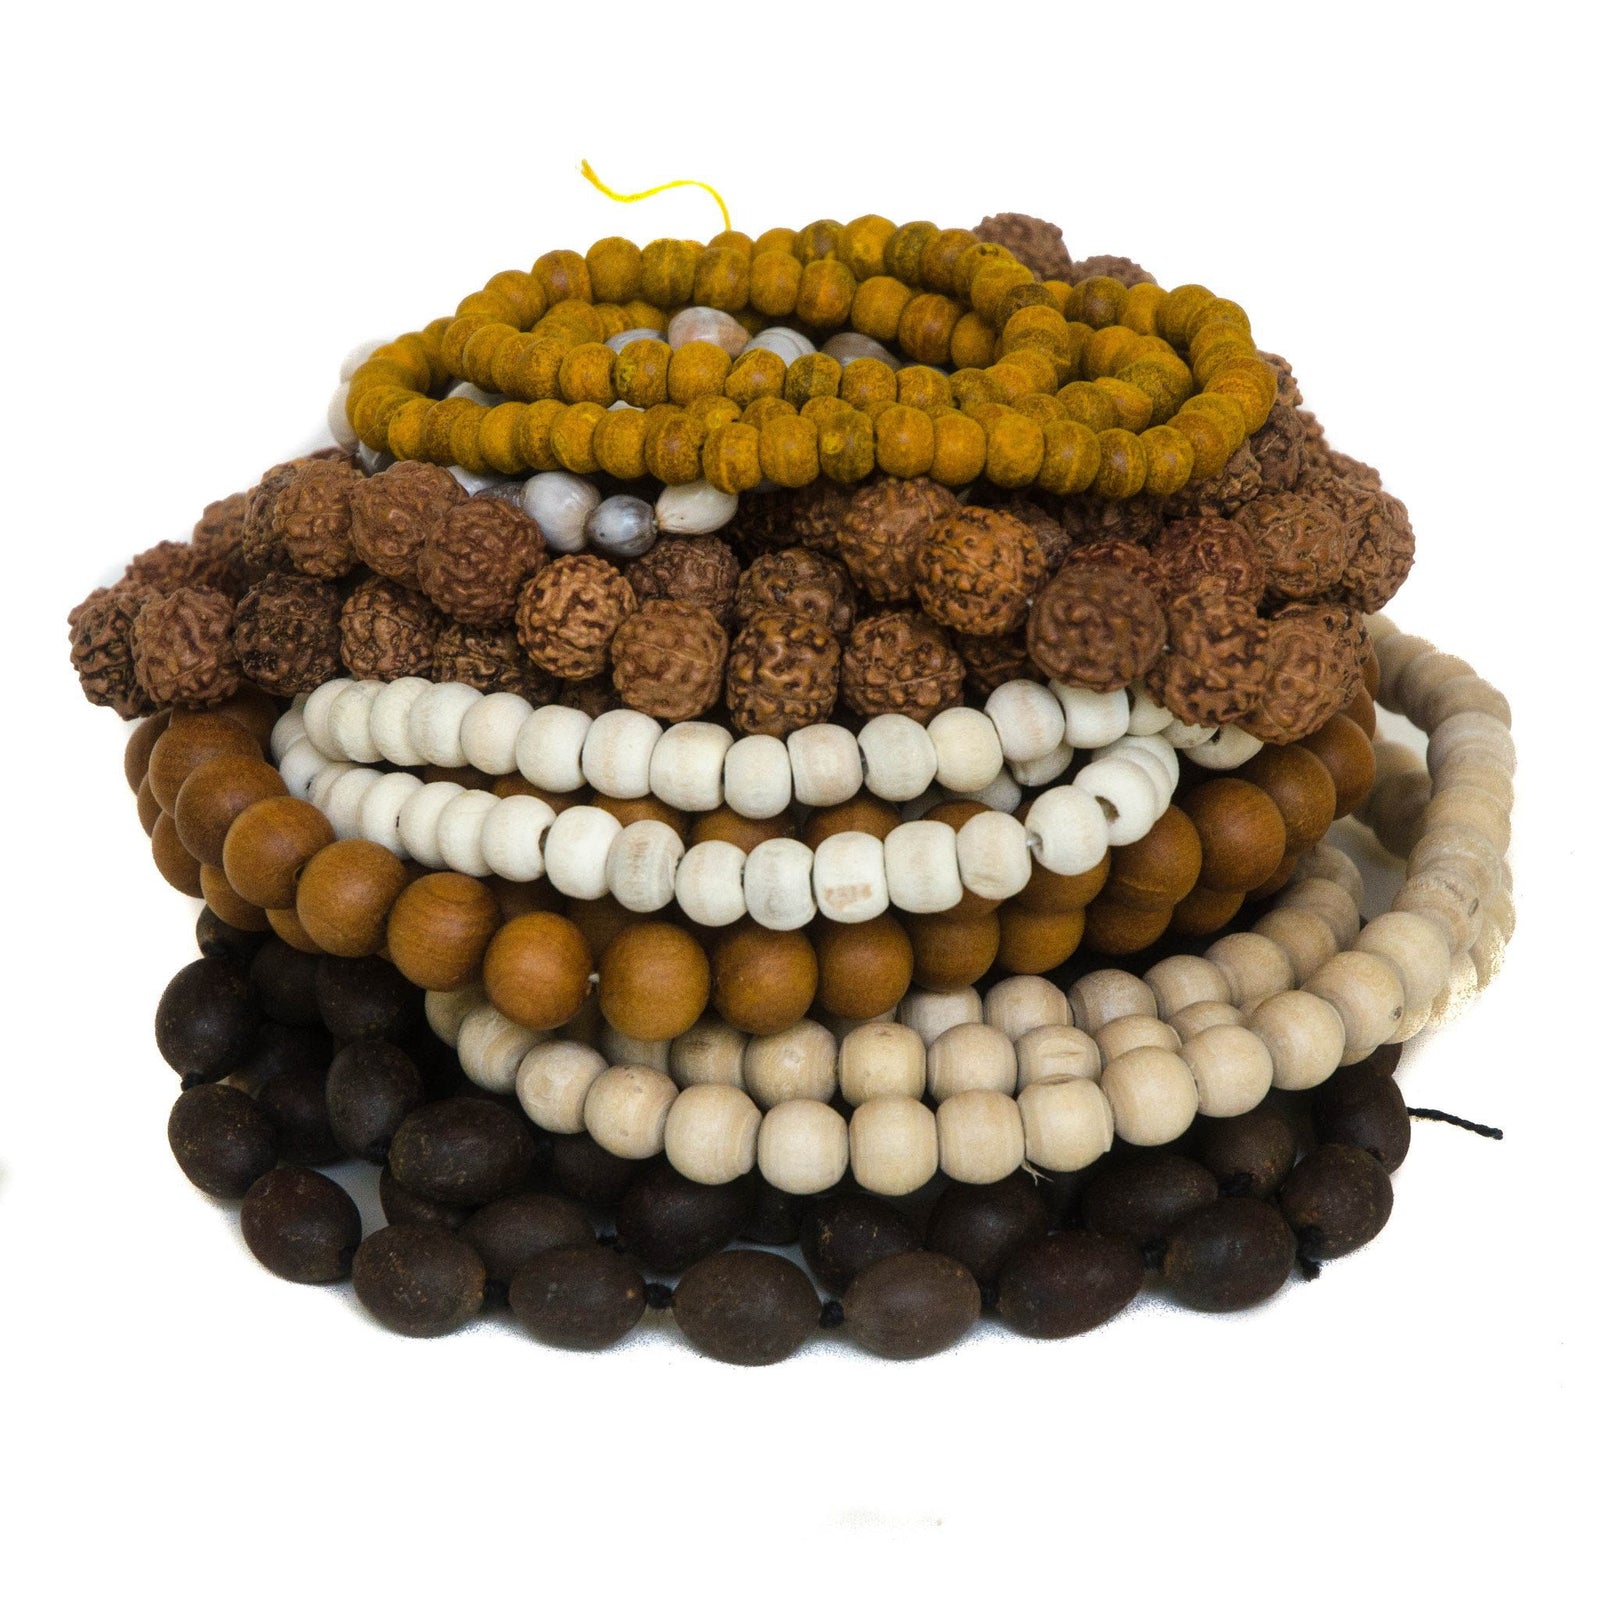 The Truth About Sandalwood Beads Your Supplier Never Told You - IndiOdyssey